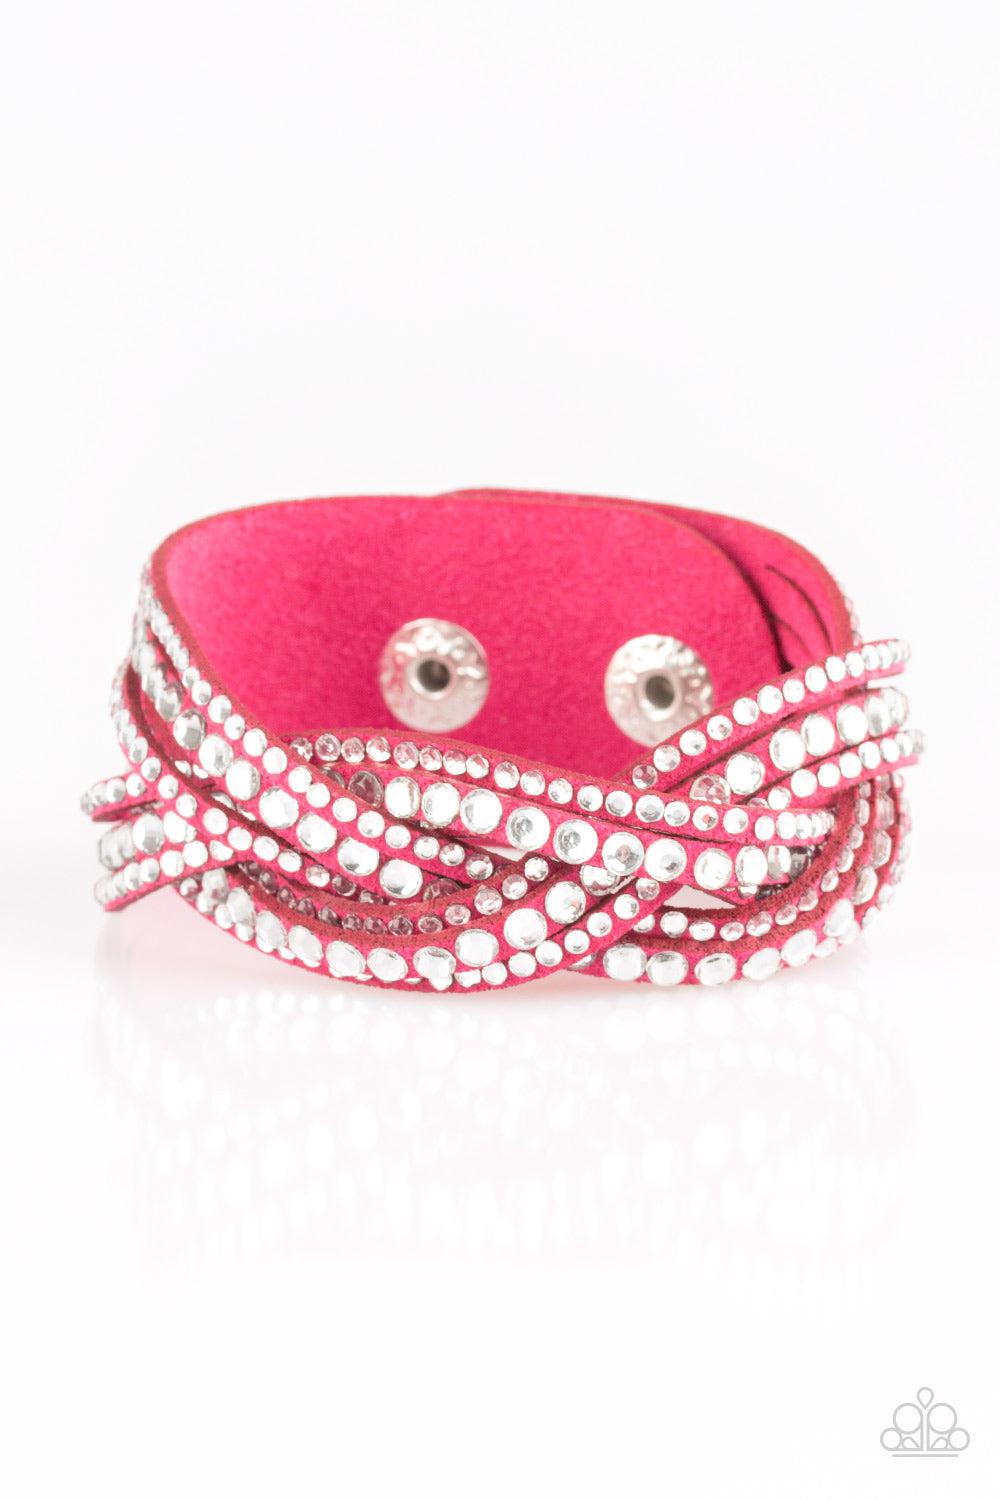 Bring on the Bling Pink Bracelet - Paparazzi Accessories- lightbox - CarasShop.com - $5 Jewelry by Cara Jewels